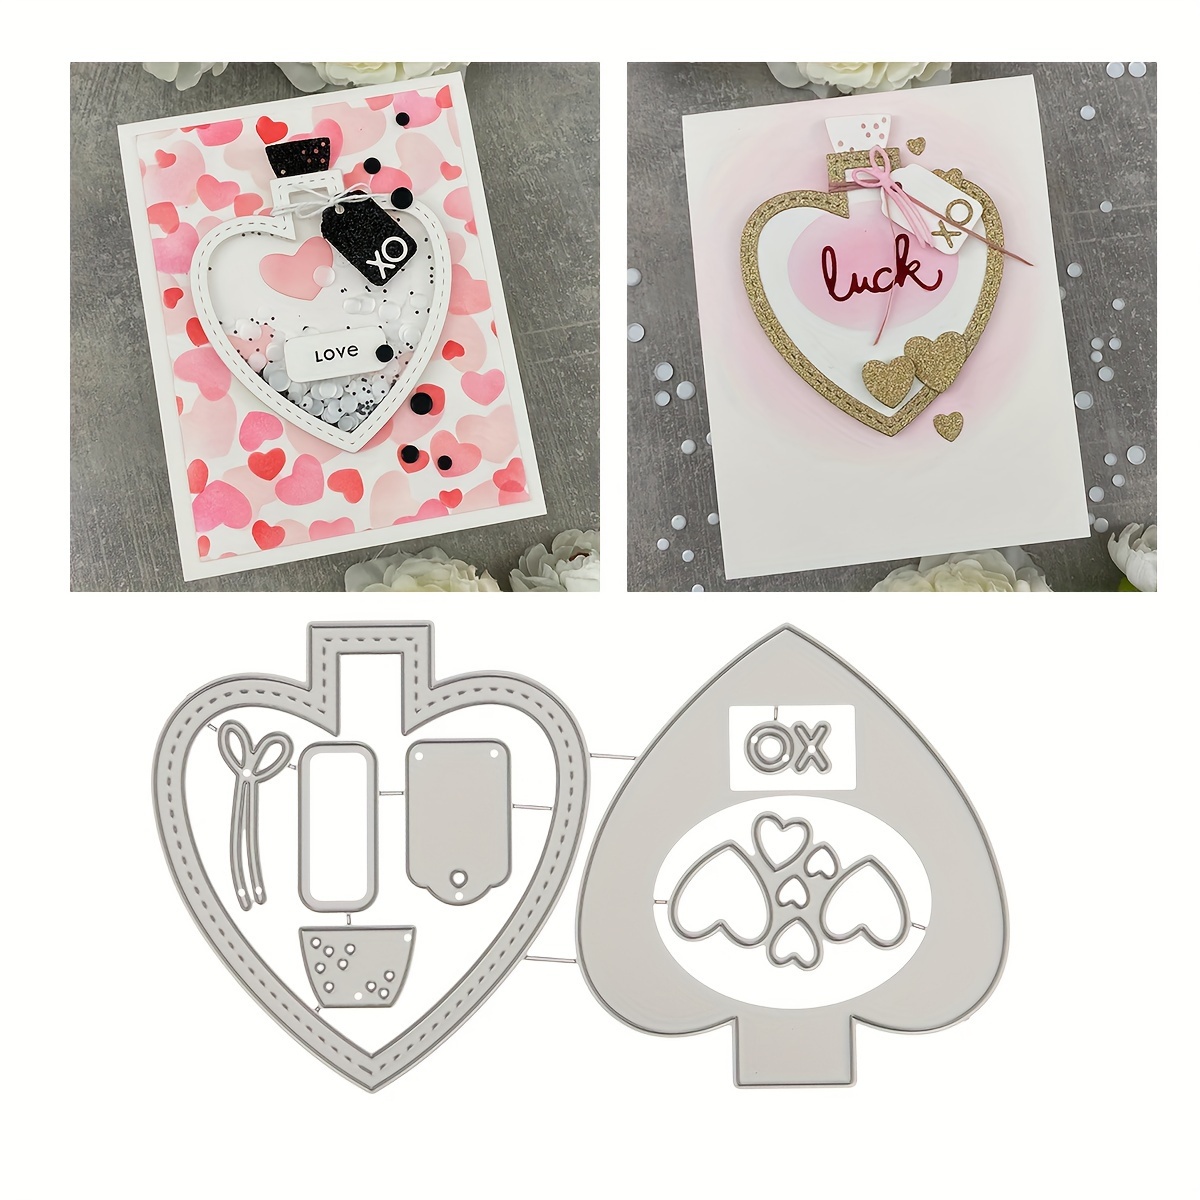 4Pcs/Pack Love Heart Metal Cutting Dies for Card Making and Scrapbooking  Birthday Valentine's Day Craft Die Cuts